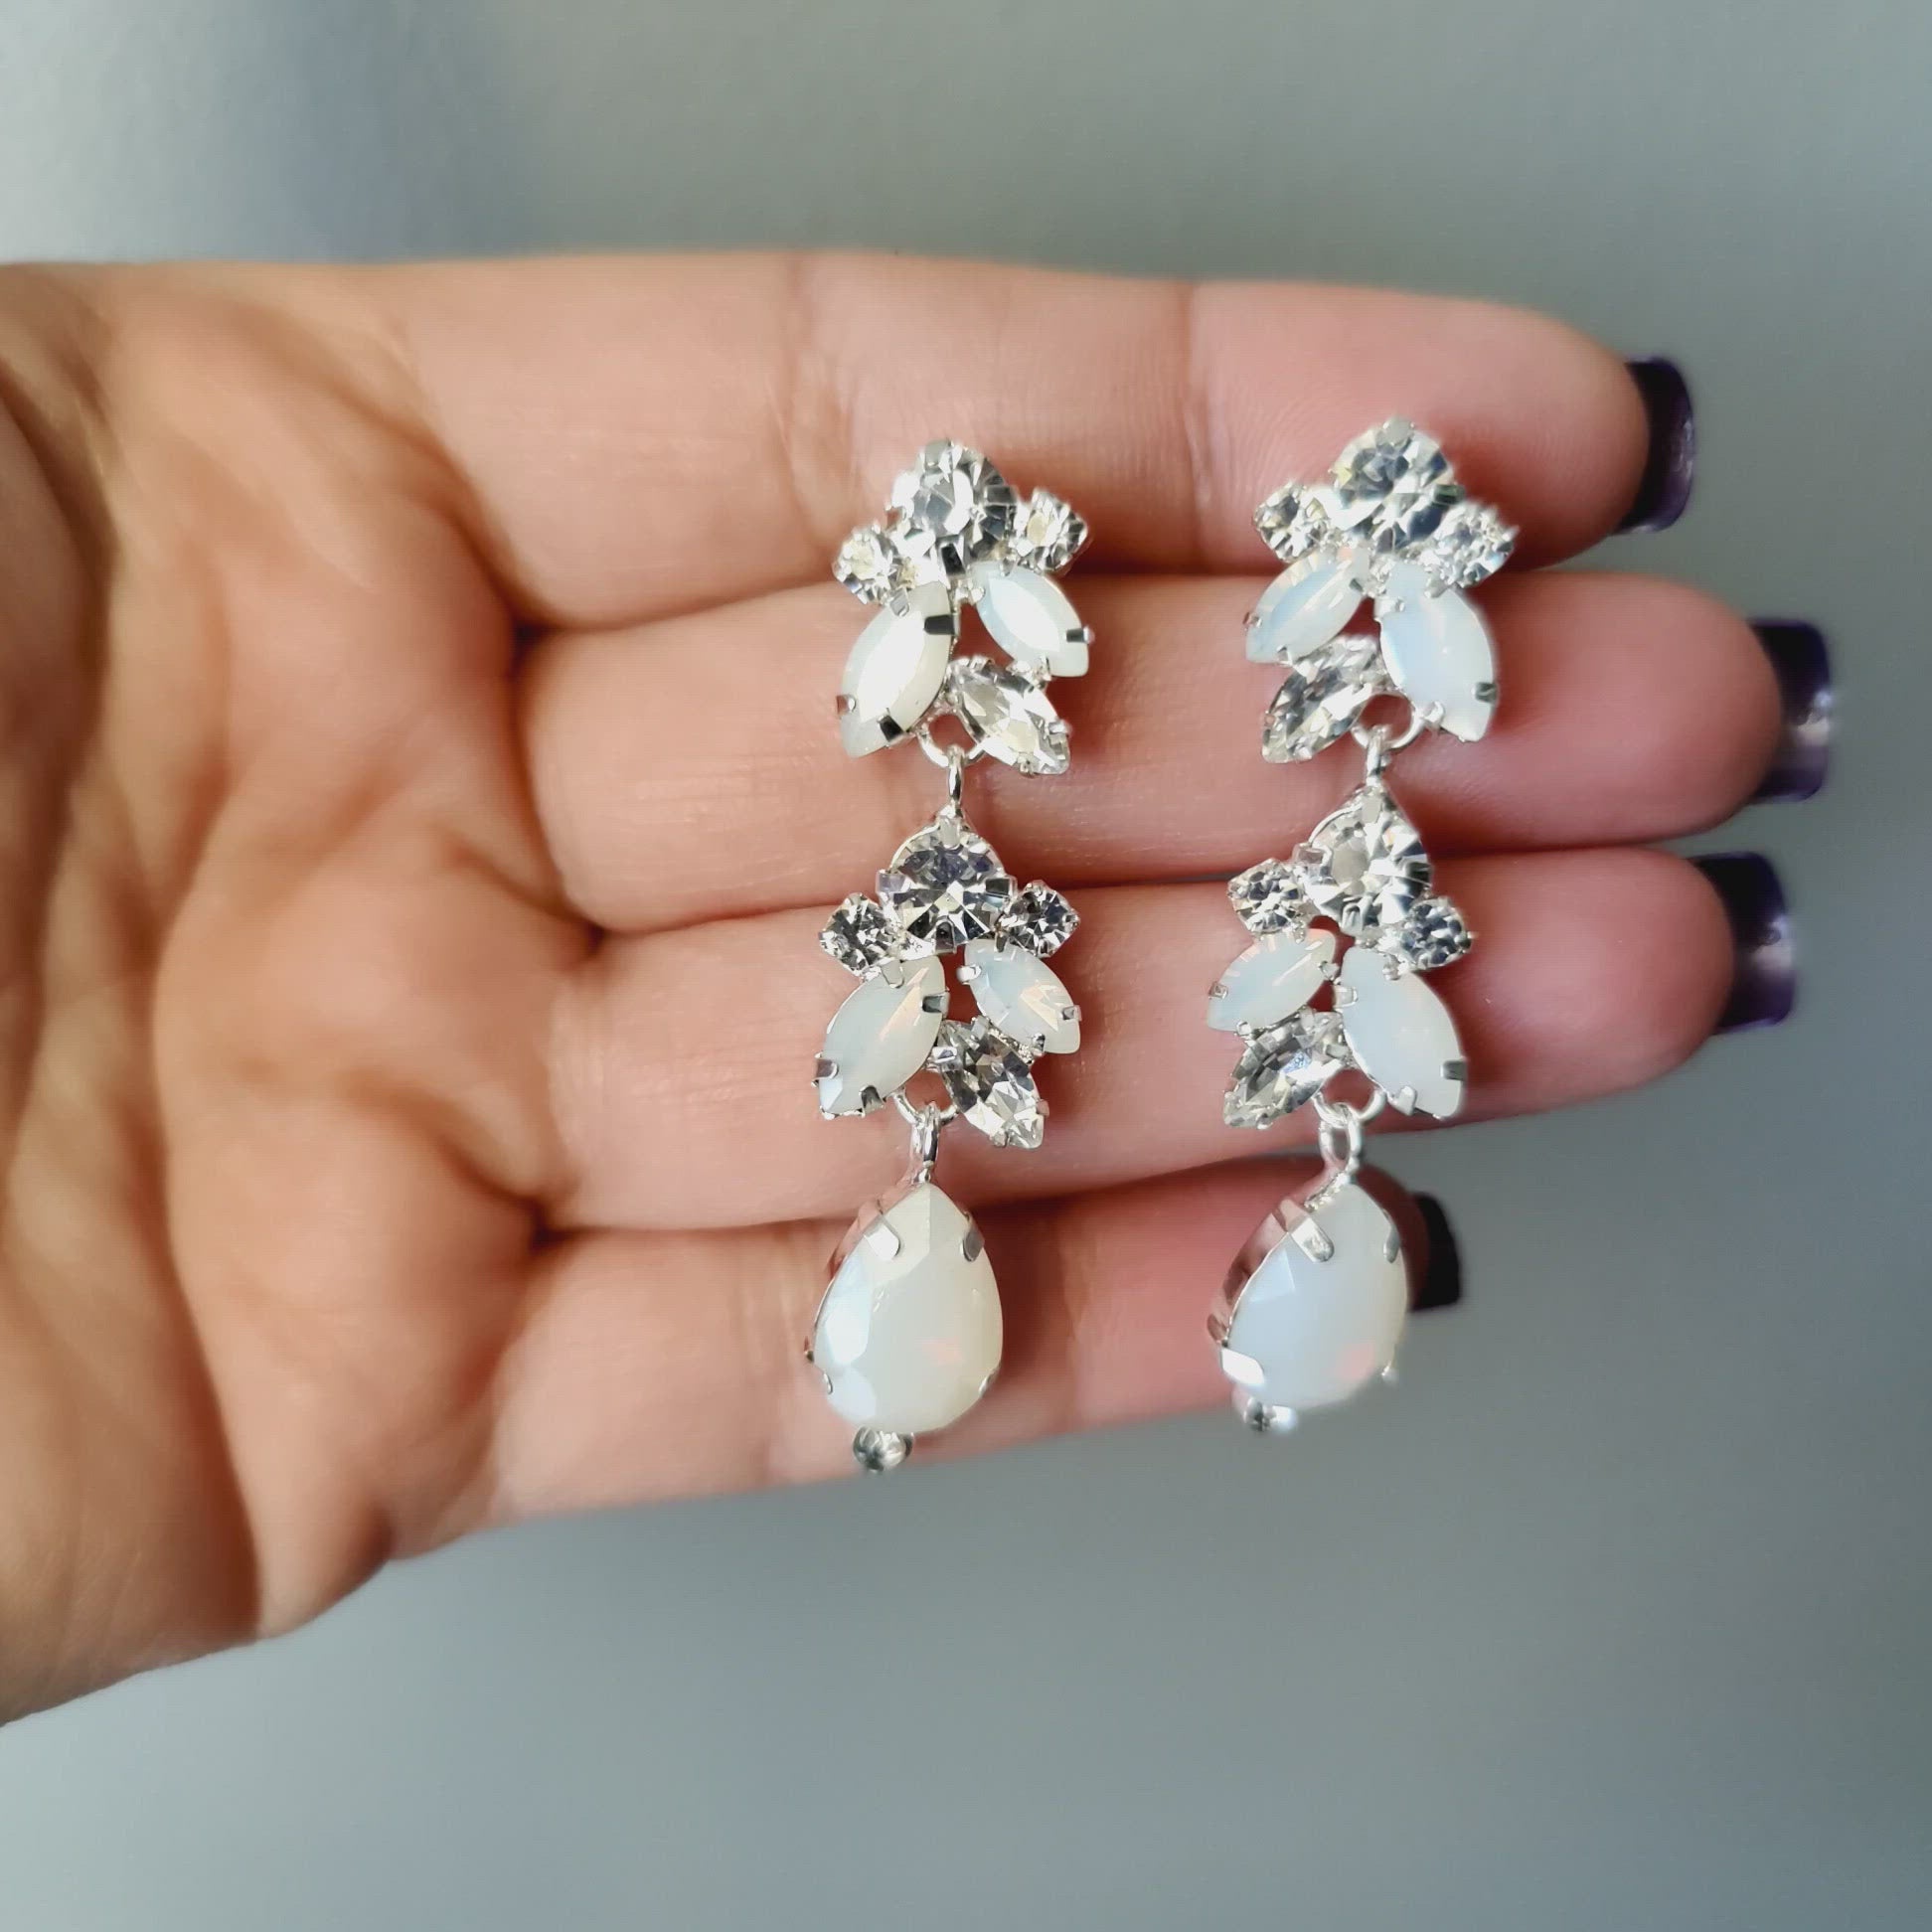 Statement bridal earrings with white opal crystals